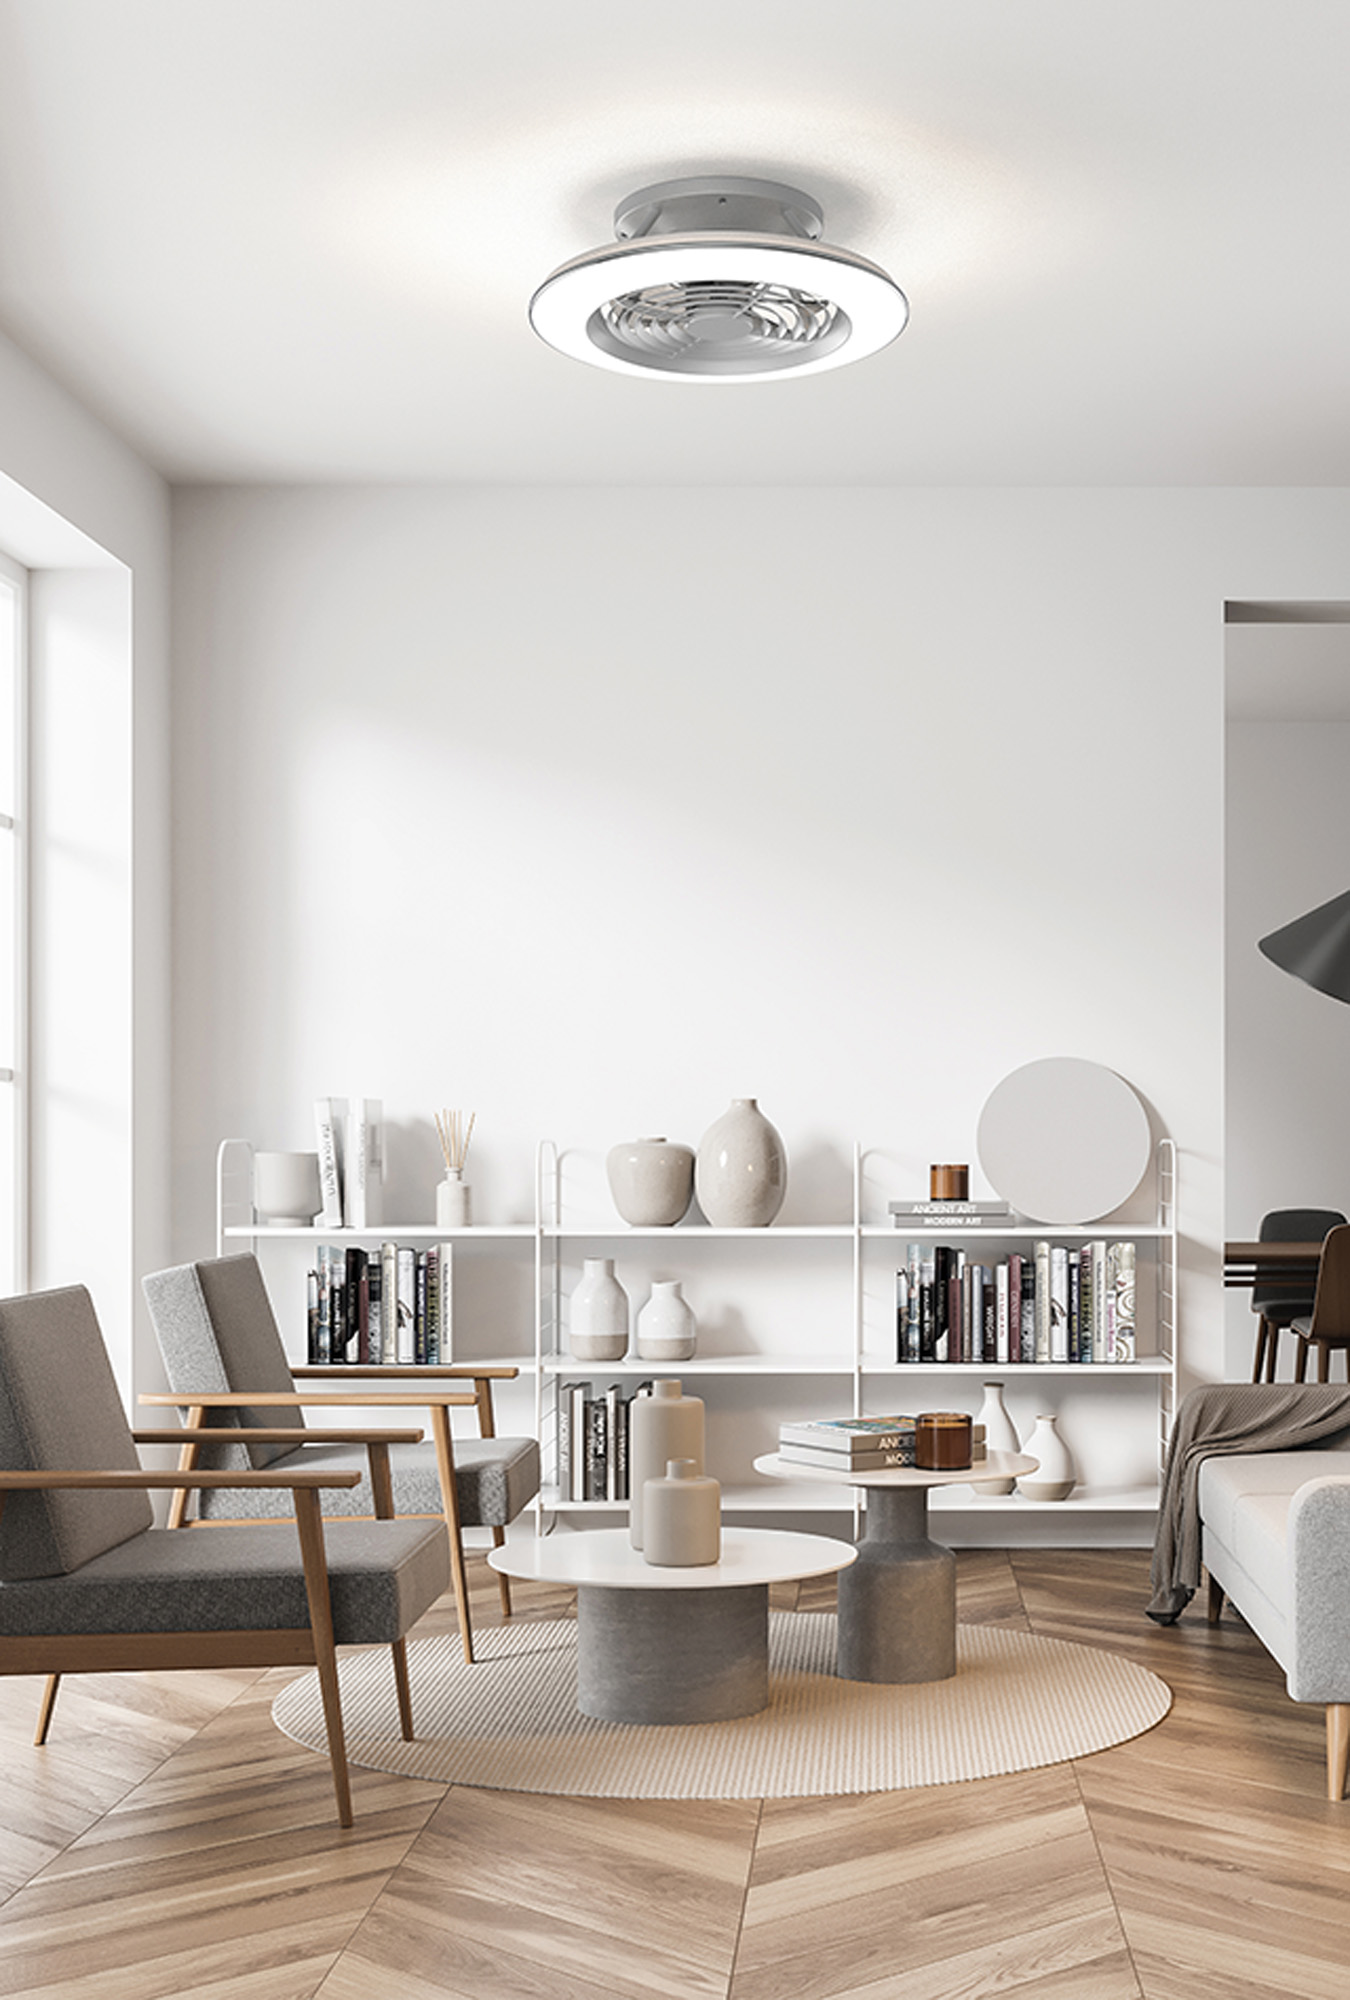 Alisio Mini Heating, Cooling & Ventilation Mantra Ceiling Fans